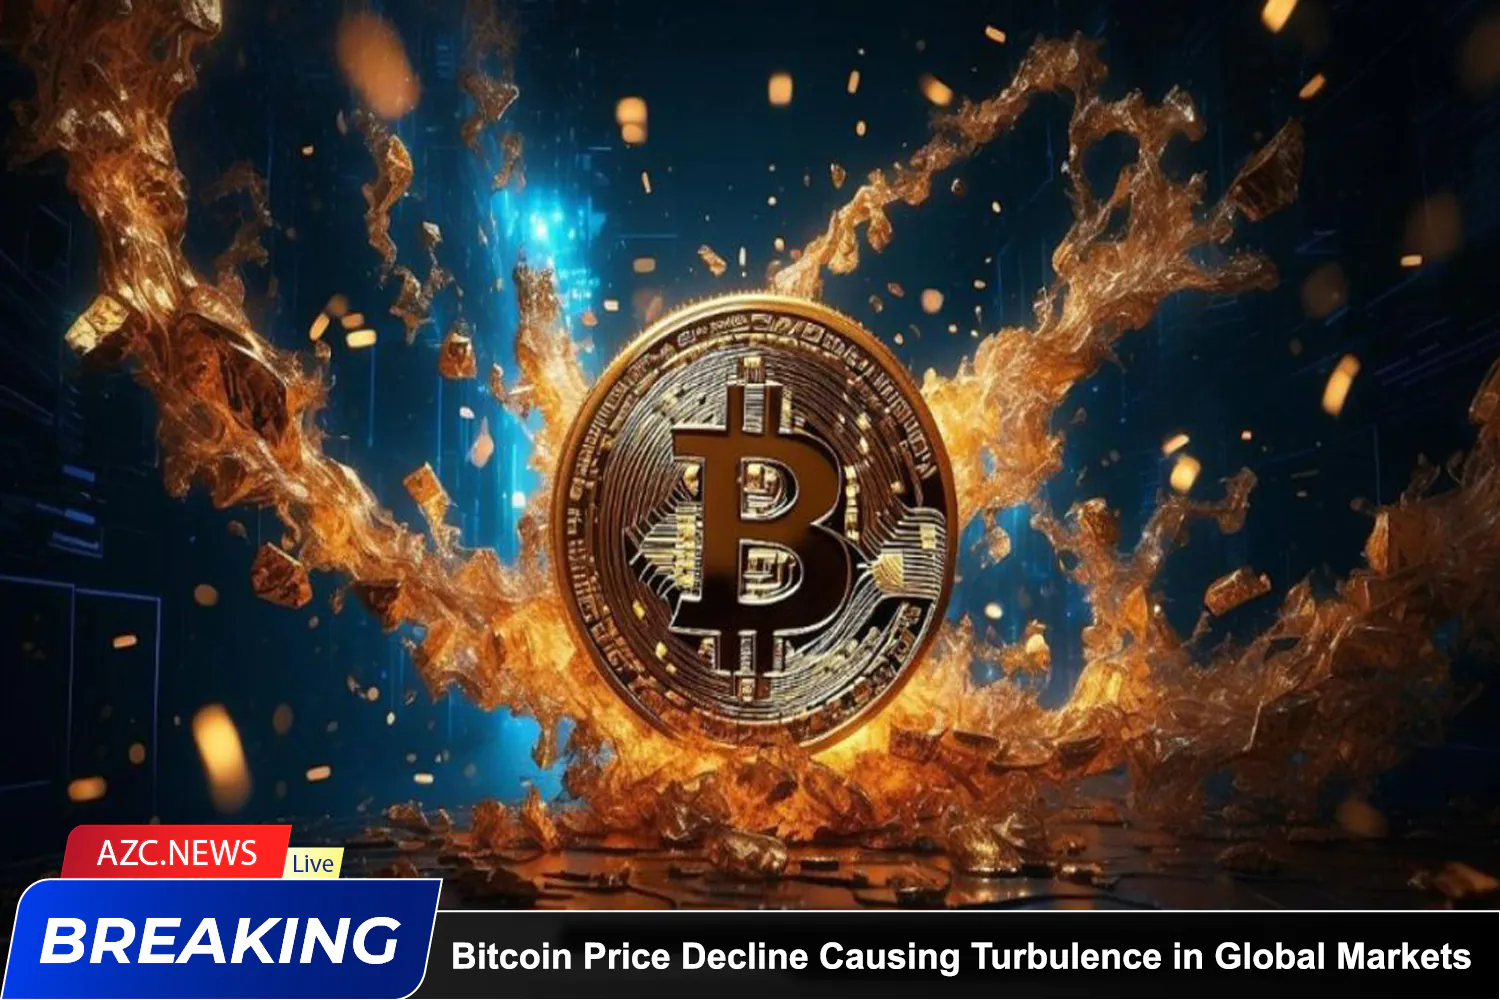 Azcnews Bitcoin Price Decline Causing Turbulence In Global Markets